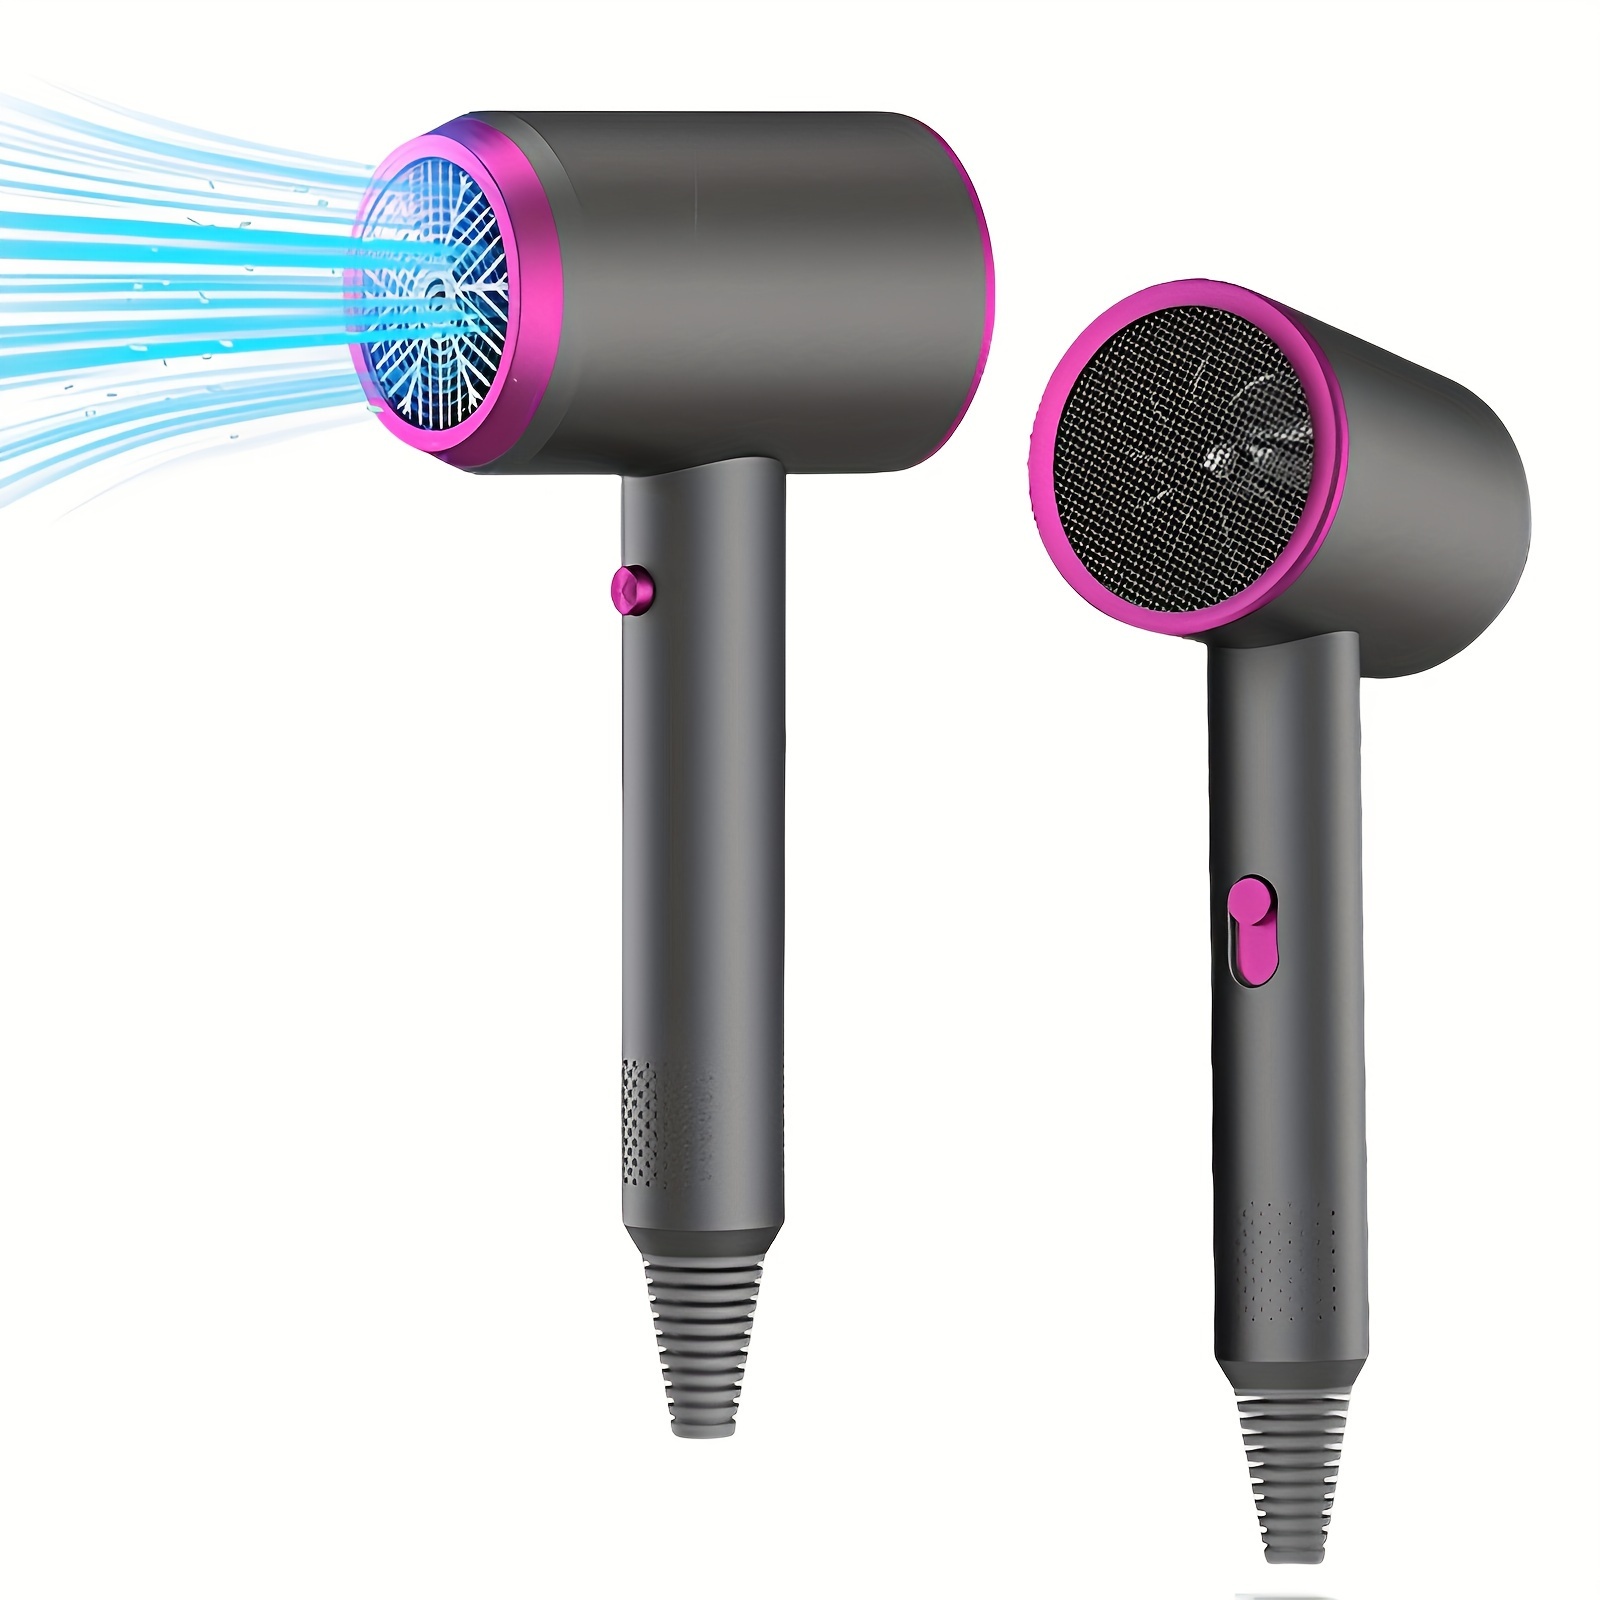 

800w High-power High-speed Hair Stylist Styling Negative Ion Hair Dryer Hair Salon Special Fast-drying Household Hair Dryer